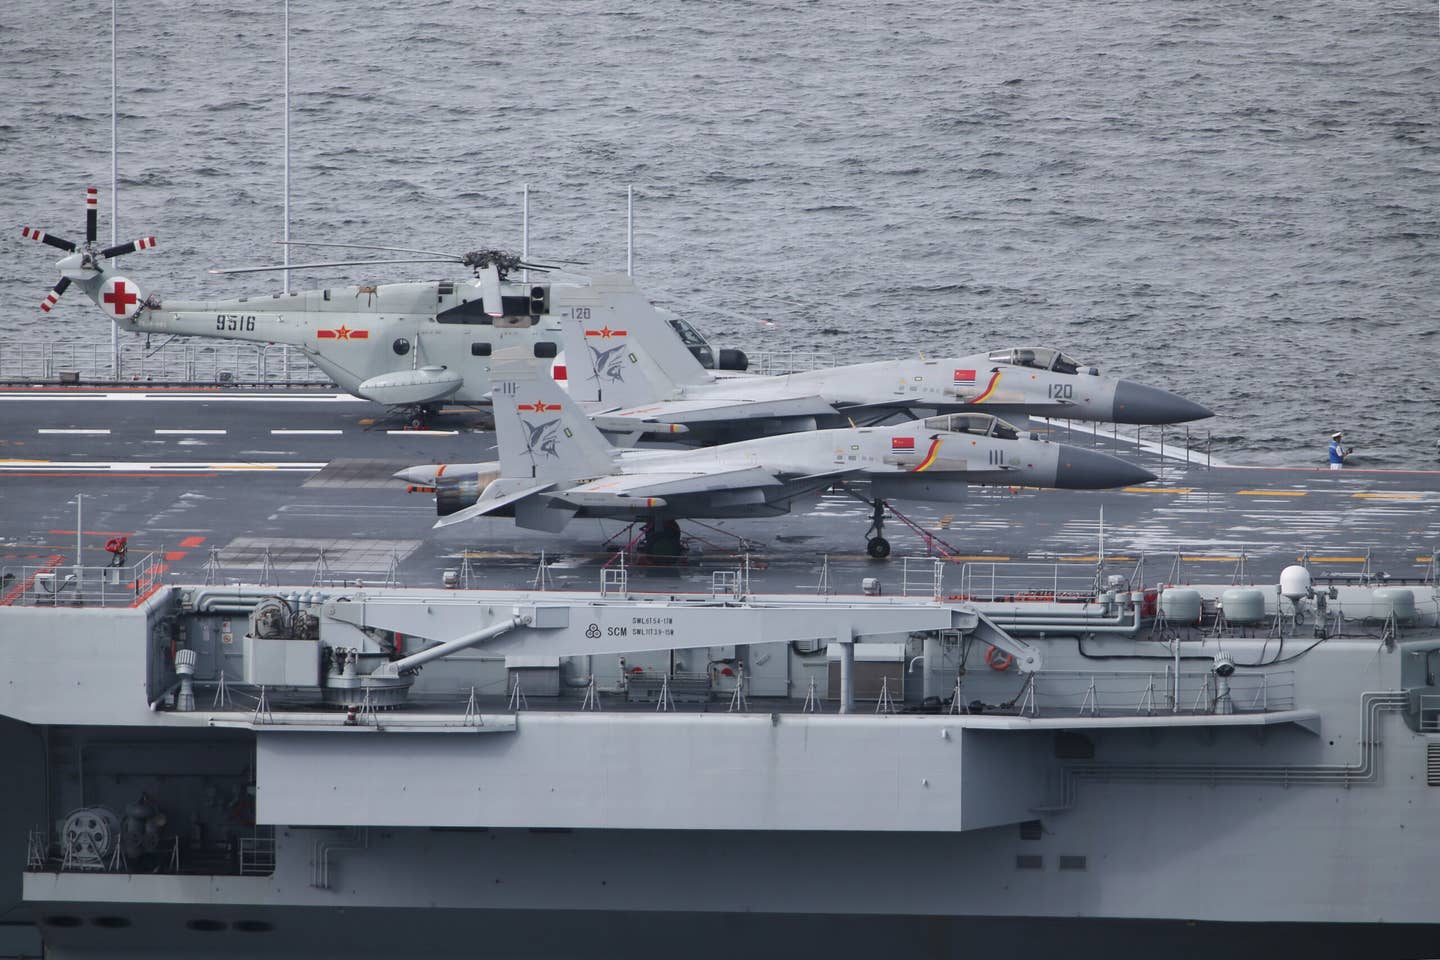 J-15 fighter jets and a Z-8JH&nbsp;search and rescue helicopter on the deck of Liaoning, the first PLAN first aircraft carrier. <em>Photo by SAM TSANG/South China Morning Post via Getty Images</em>